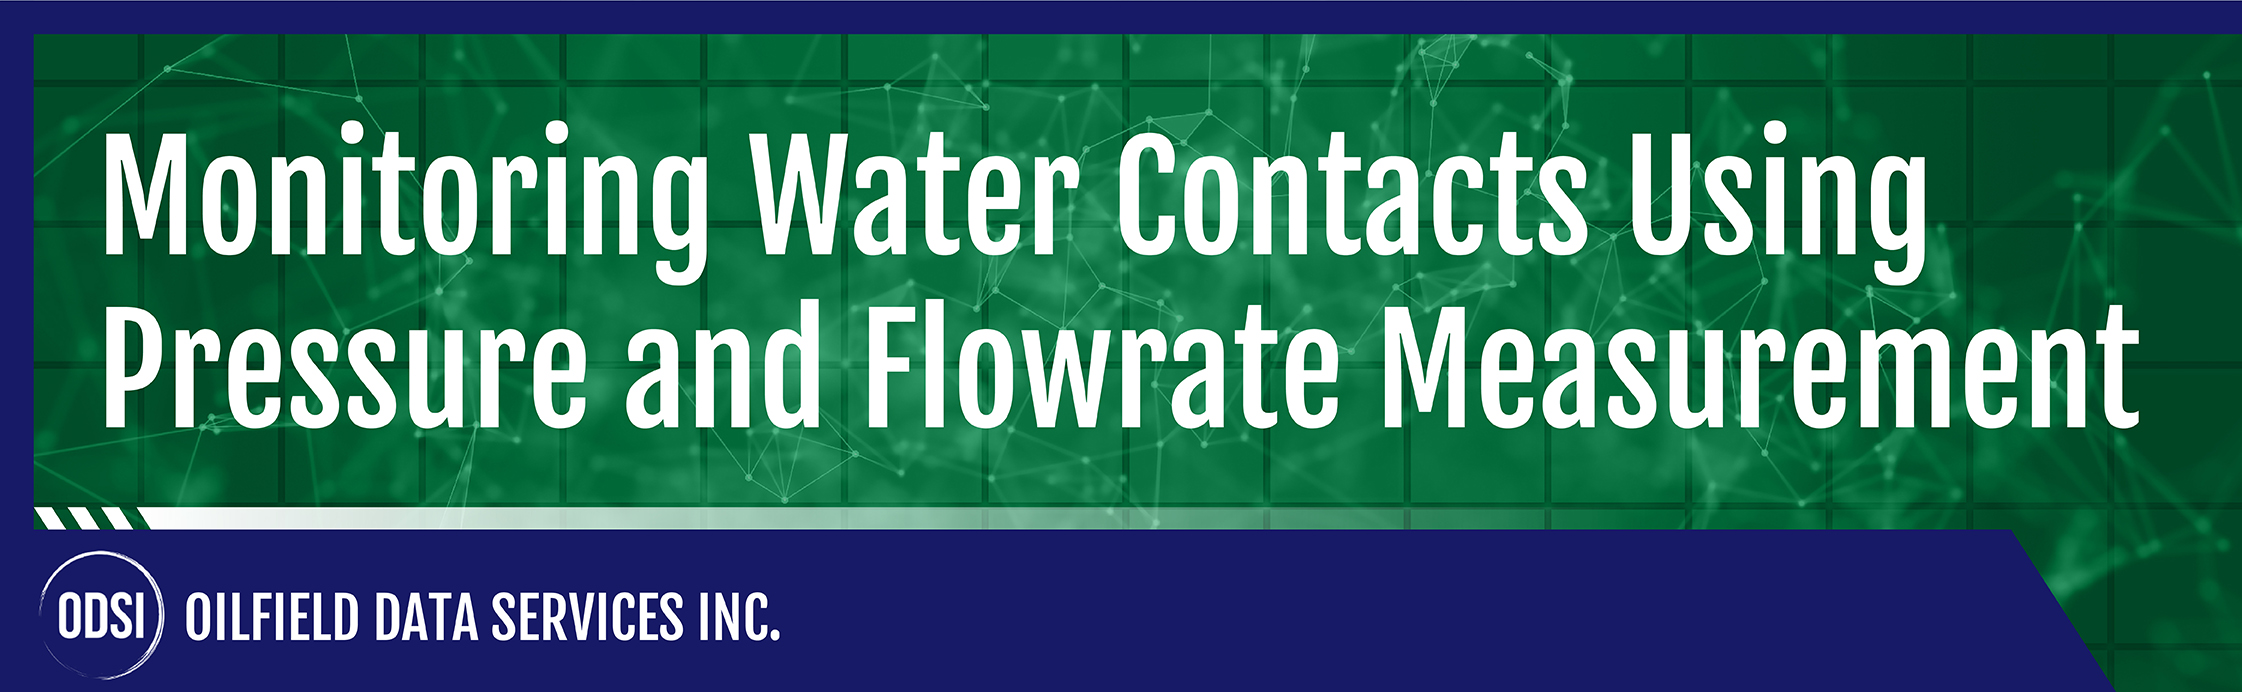 Monitoring Water Contacts Using Pressure and Flowrate measurements